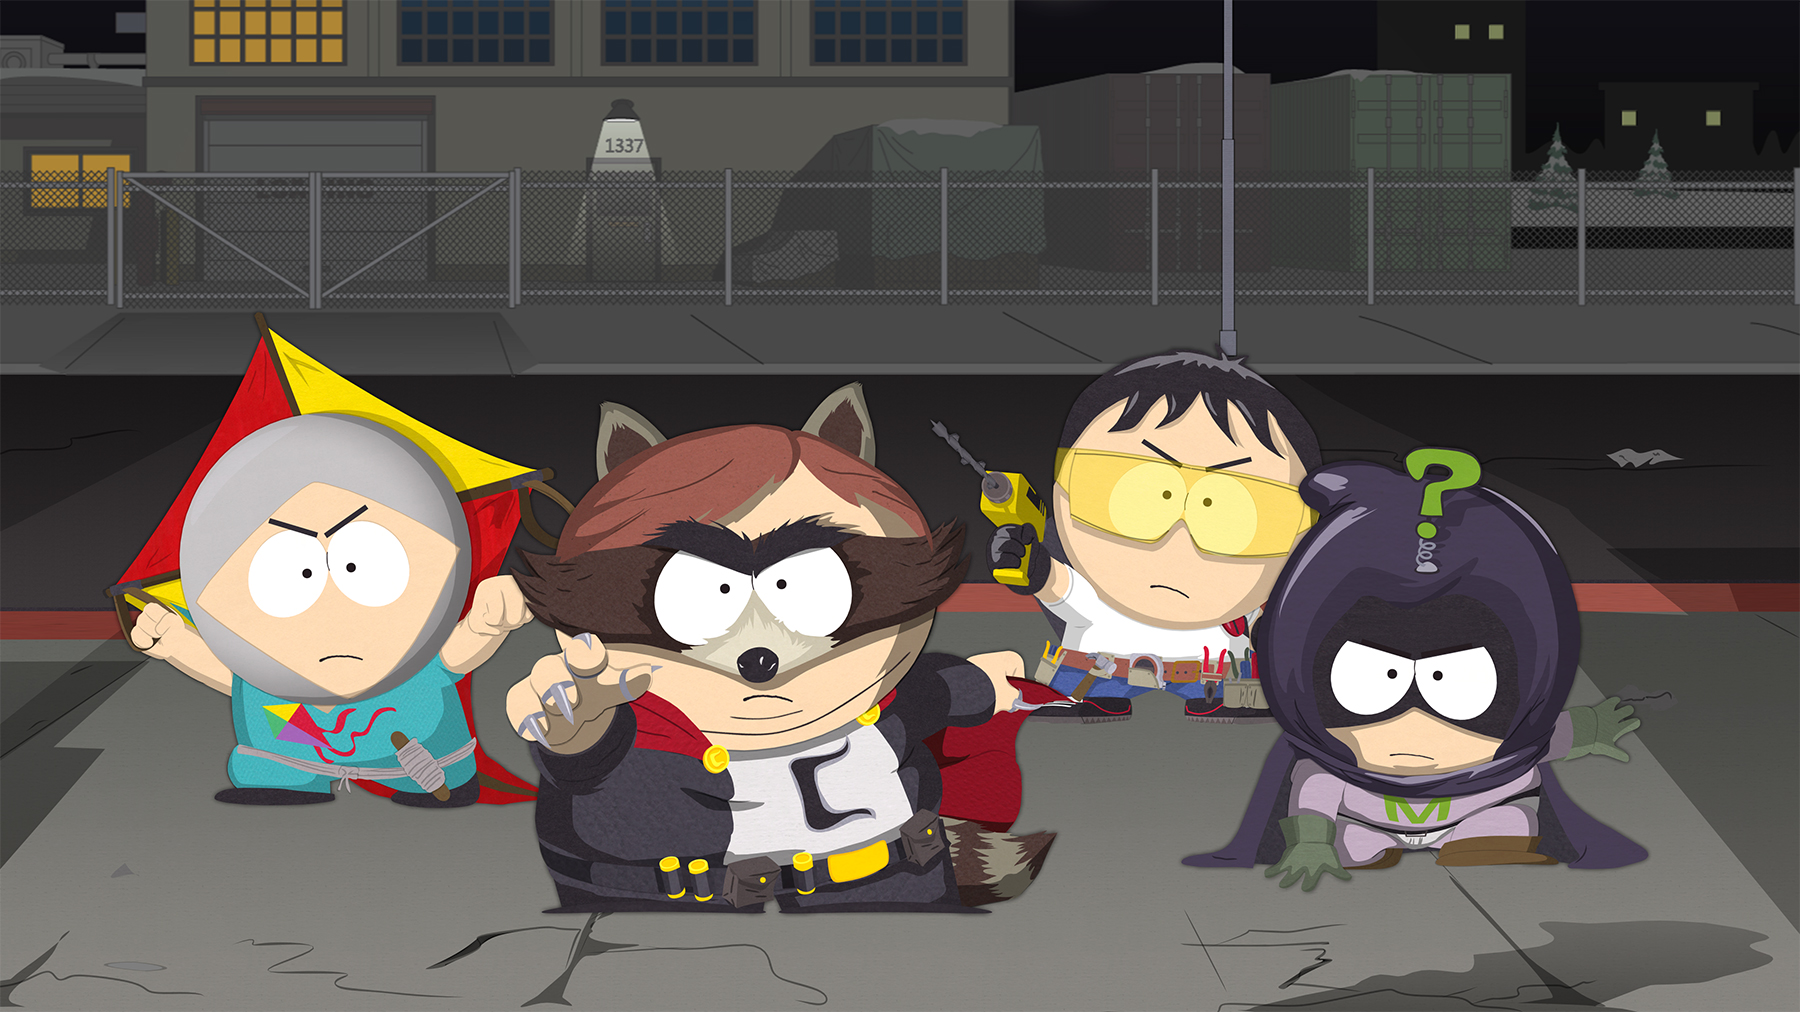 video game, south park: the fractured but whole, eric cartman, kenny mccormick, kyle broflovski, stan marsh, the coon (south park), south park